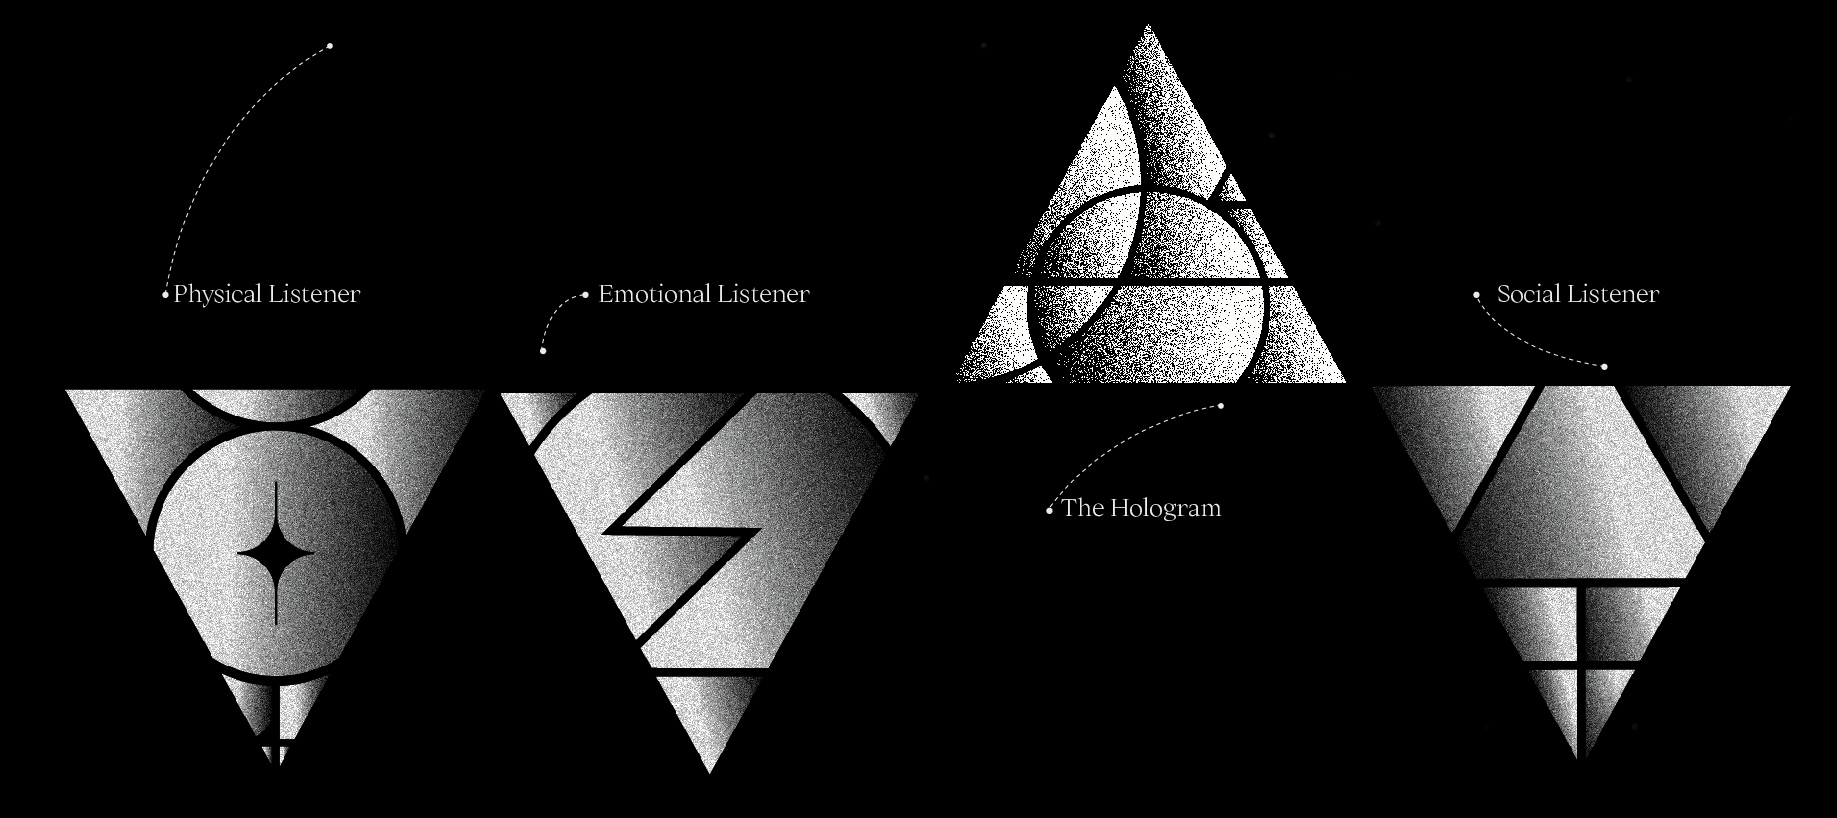 4 black and white textured triangles outlining a physcial listener, emotional listener, the hologram and social listener